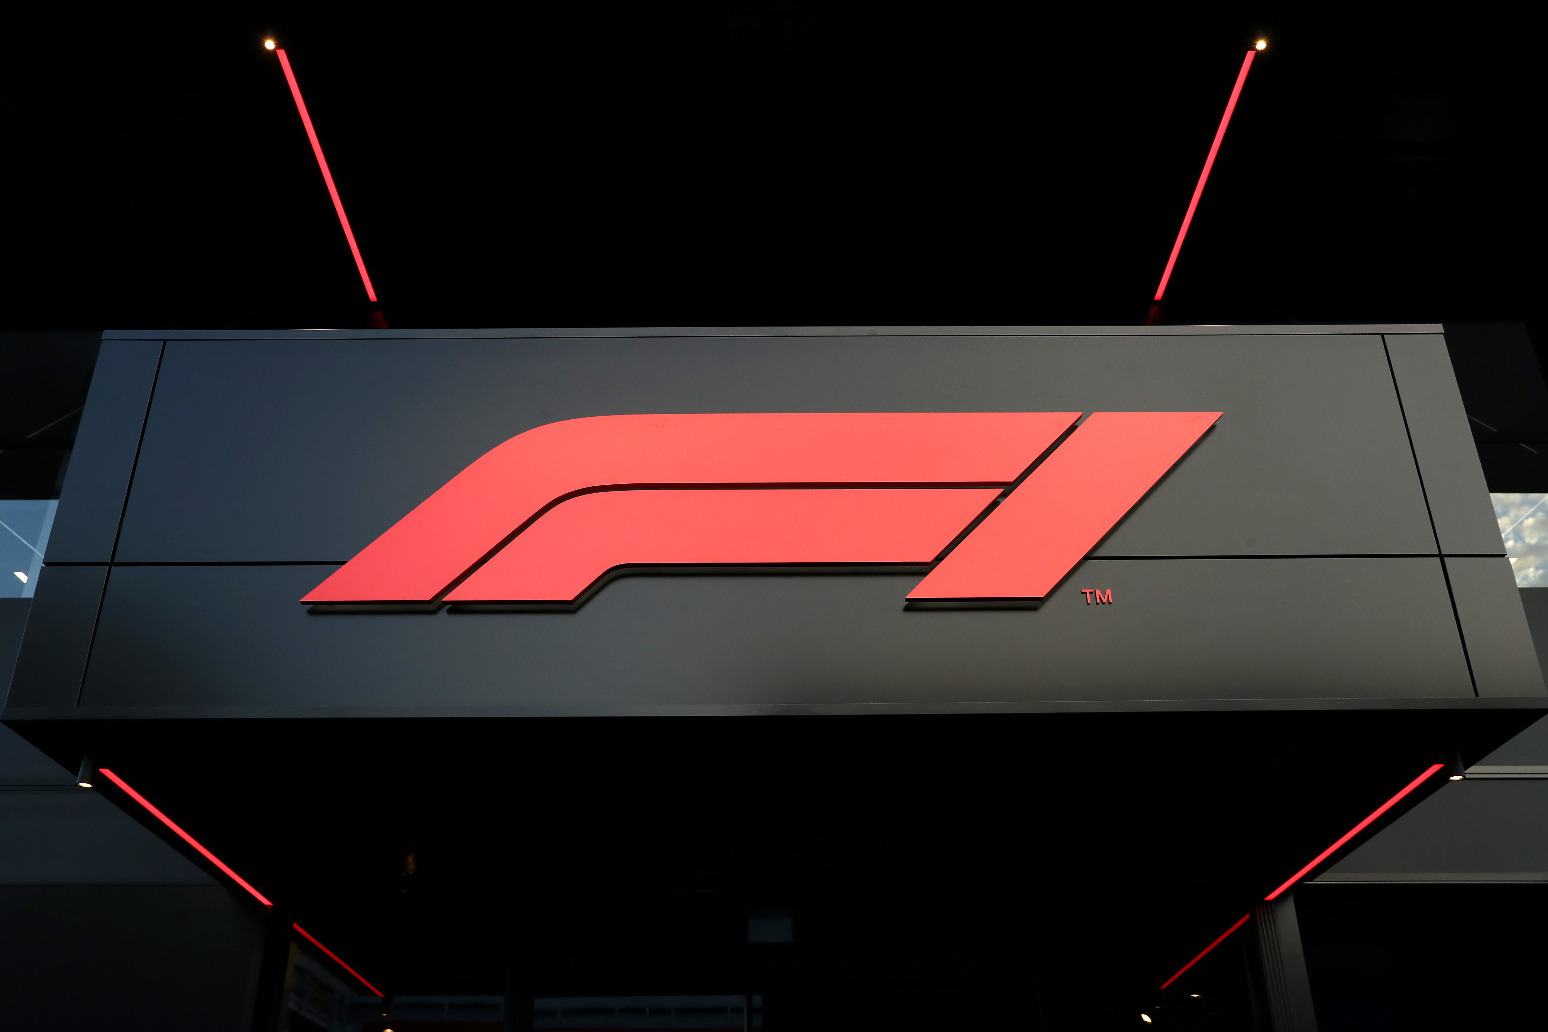 Chinese Grand Prix will not be replaced as F1 confirms record 23 races for 2023 